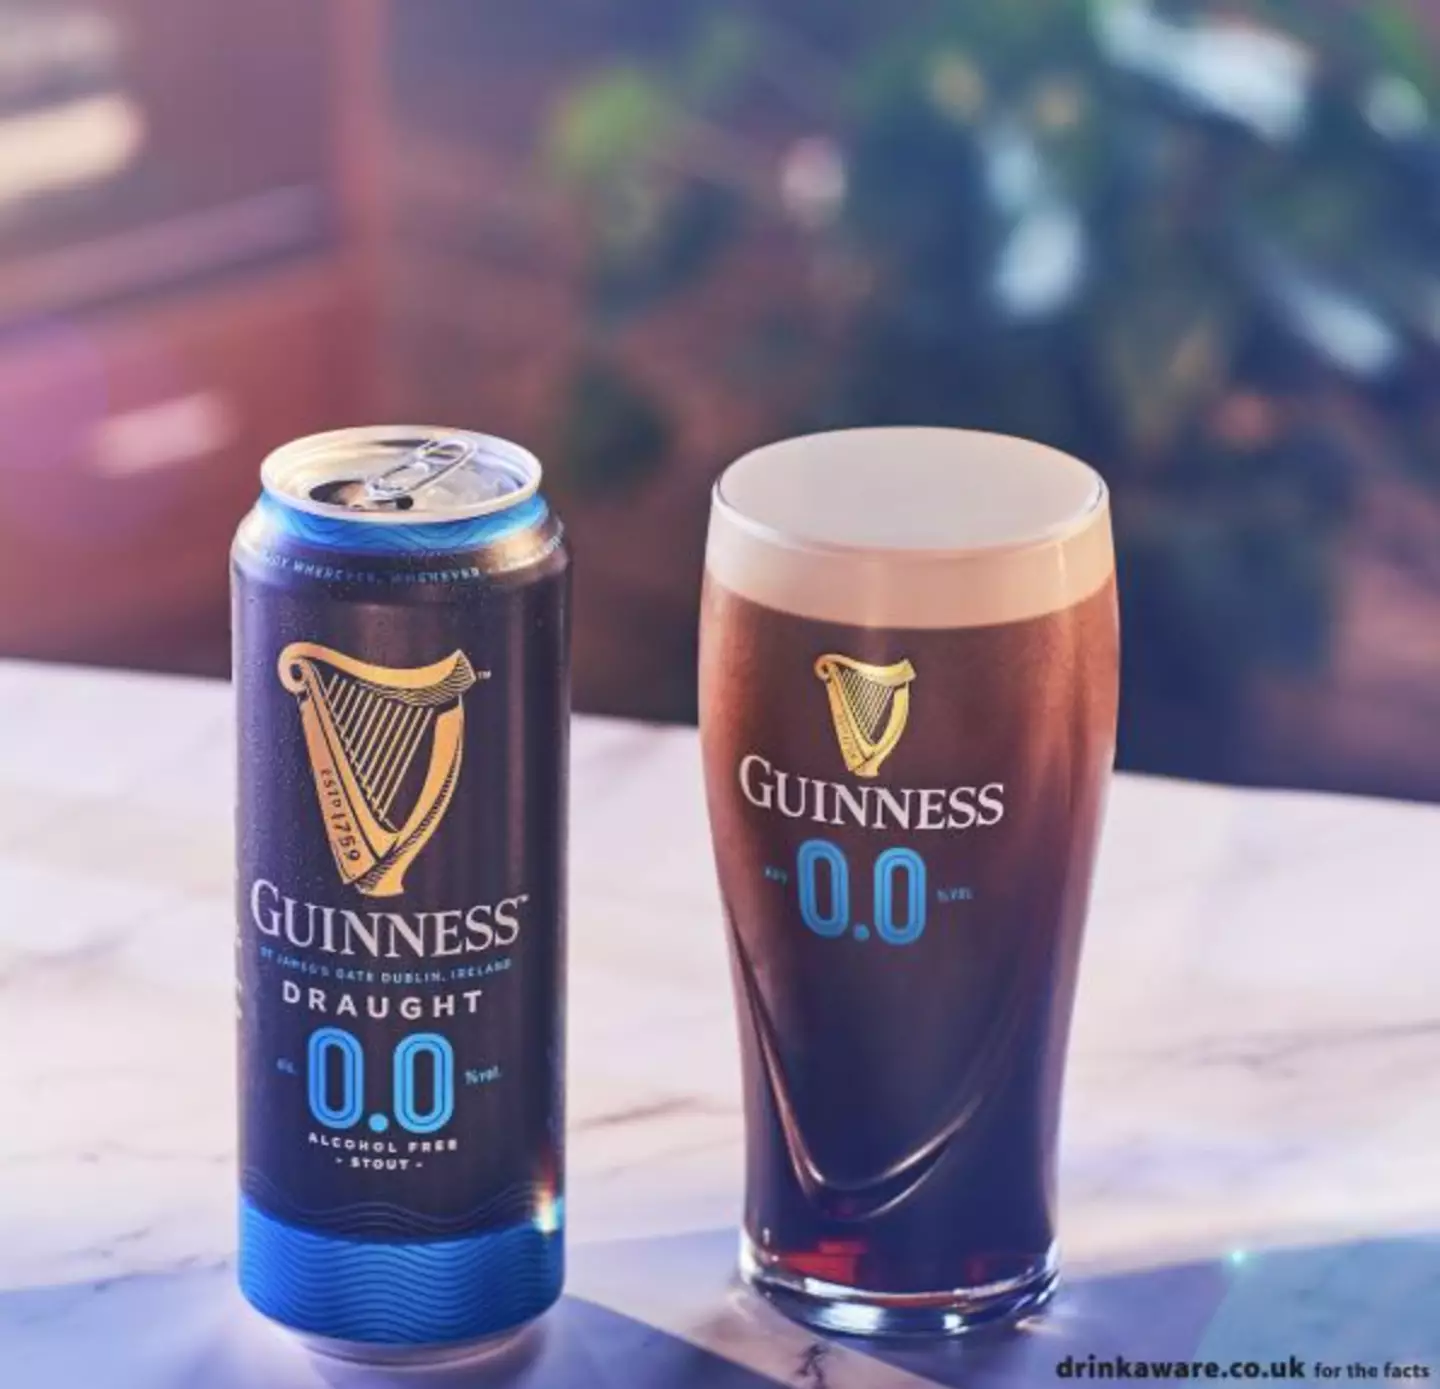 You can get free pints of Guinness 0.0.